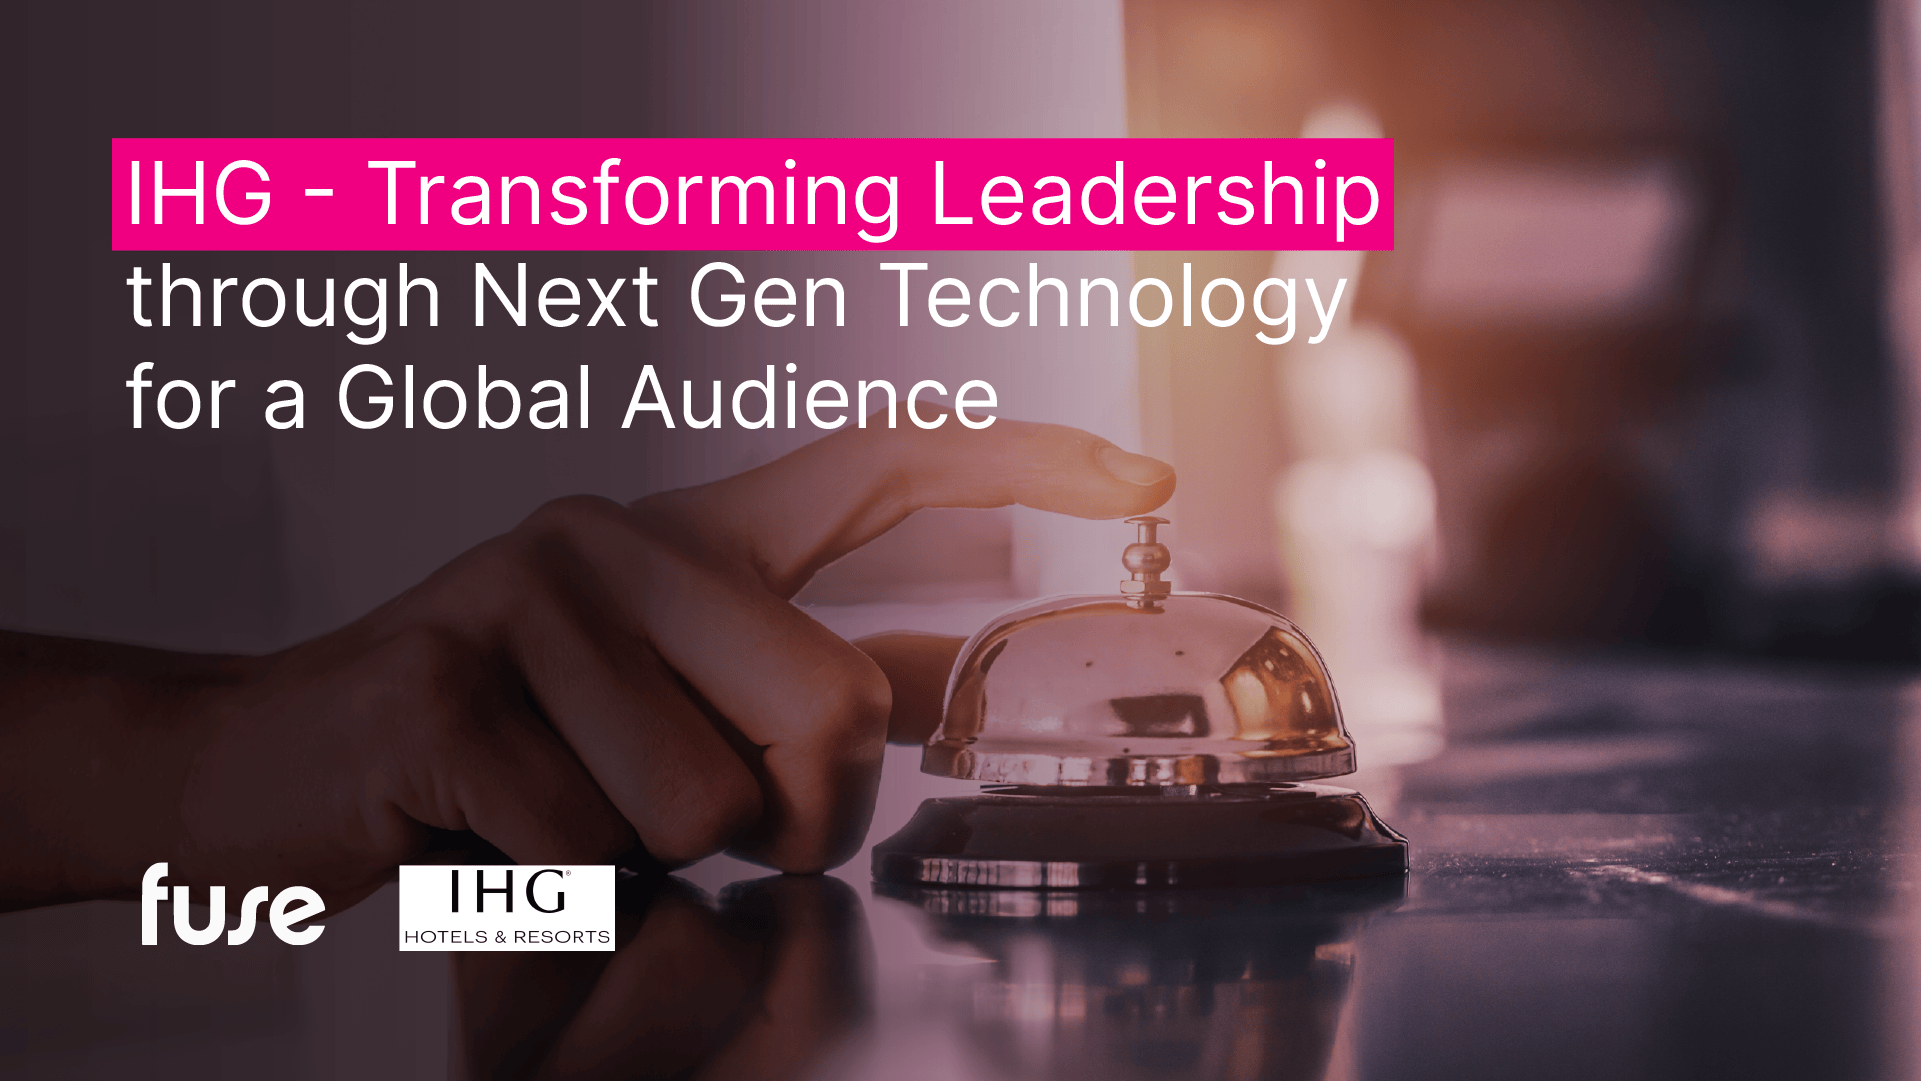 [Video] IHG - Transforming Leadership through Next Gen Technology for a Global Audience